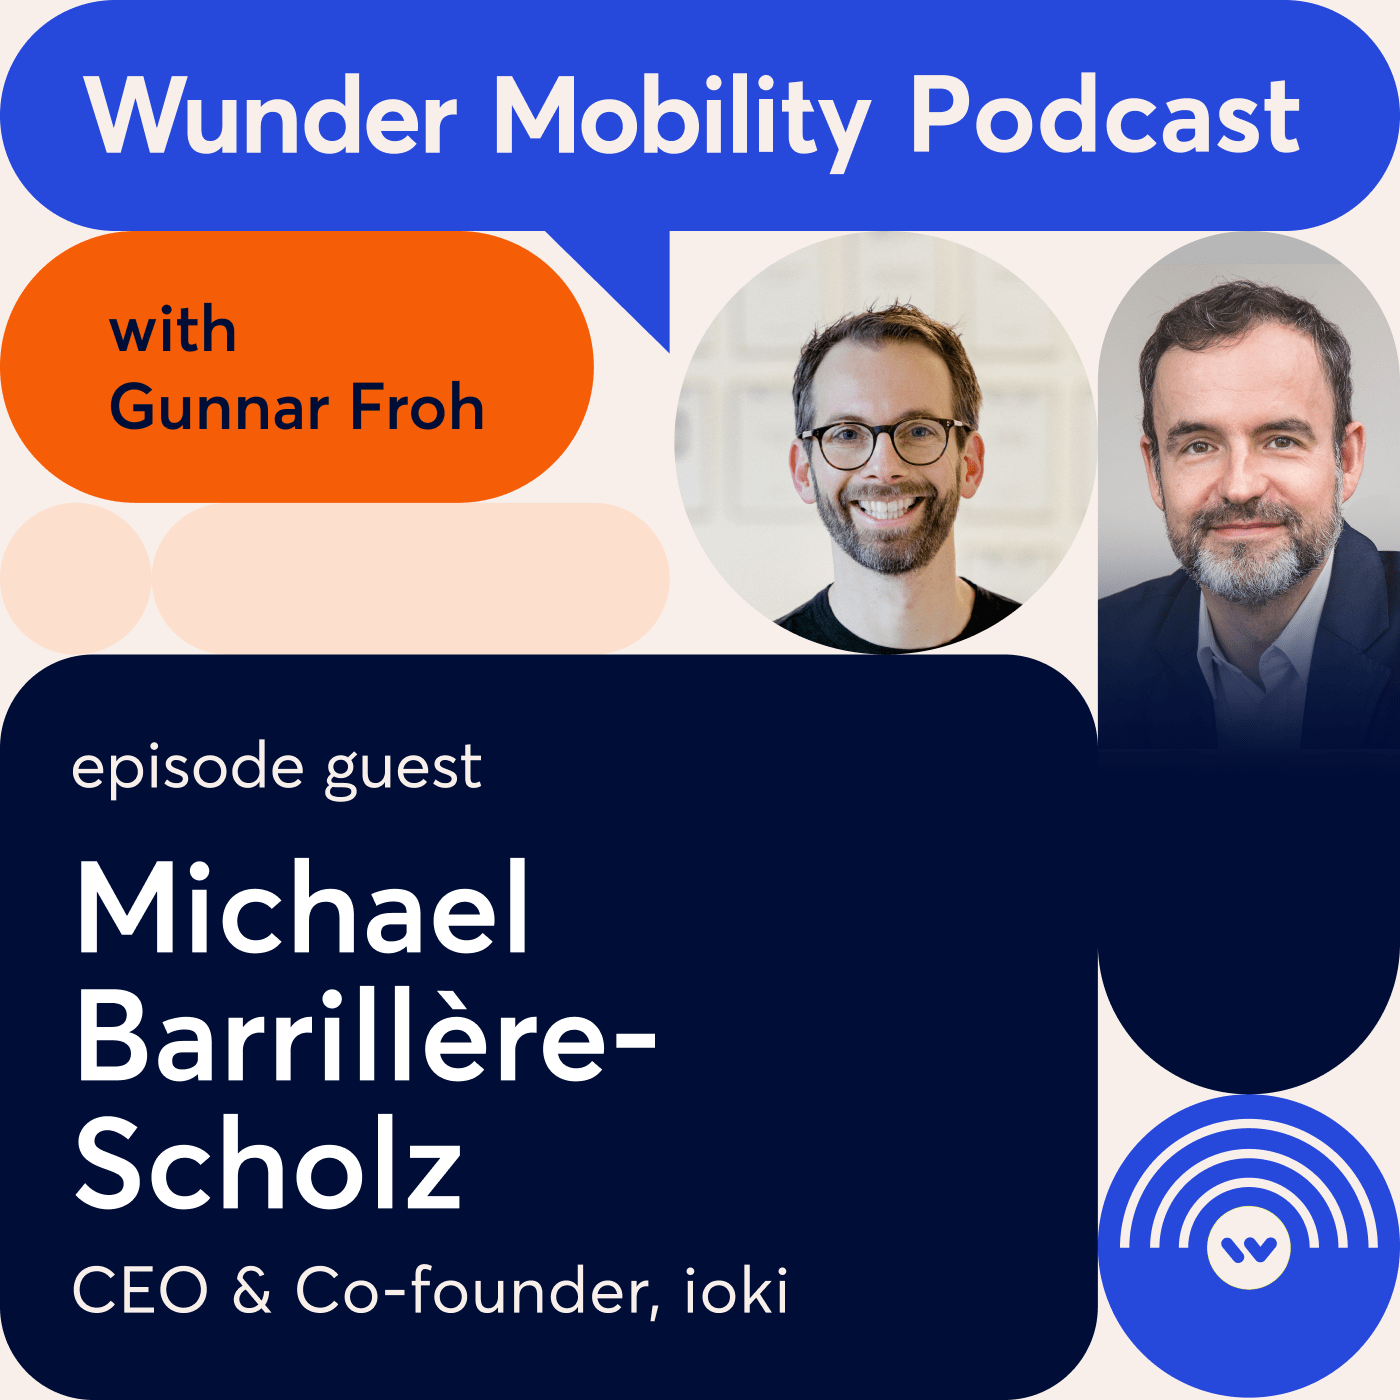 #20 Michael Barillère-Scholz, Co-founder & CEO, ioki - a DB company